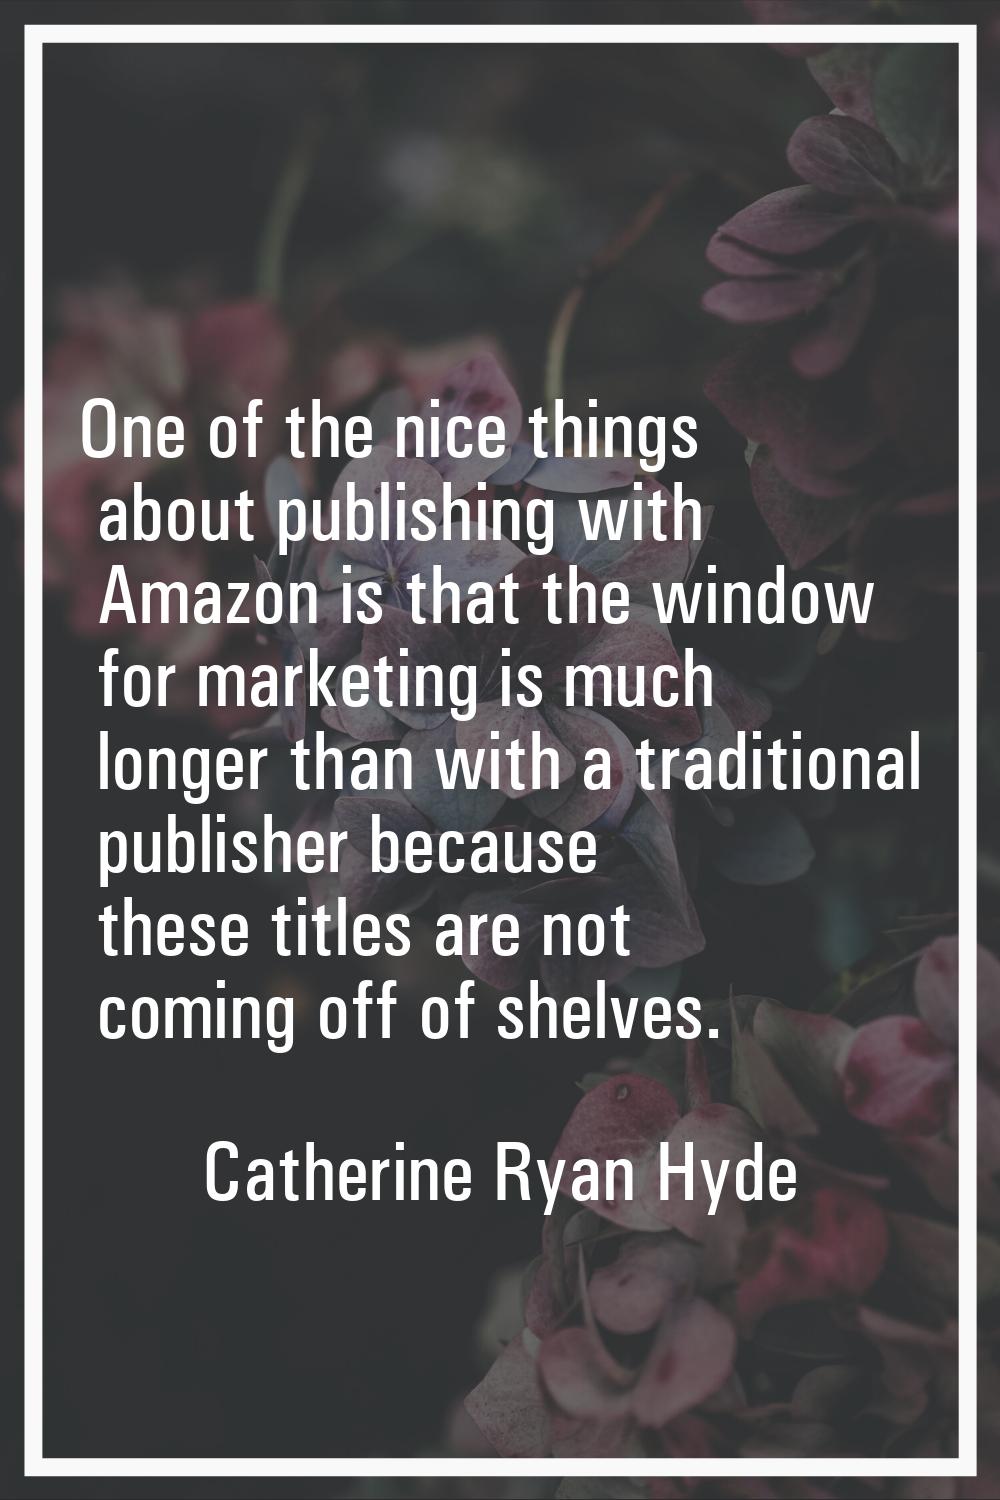 One of the nice things about publishing with Amazon is that the window for marketing is much longer